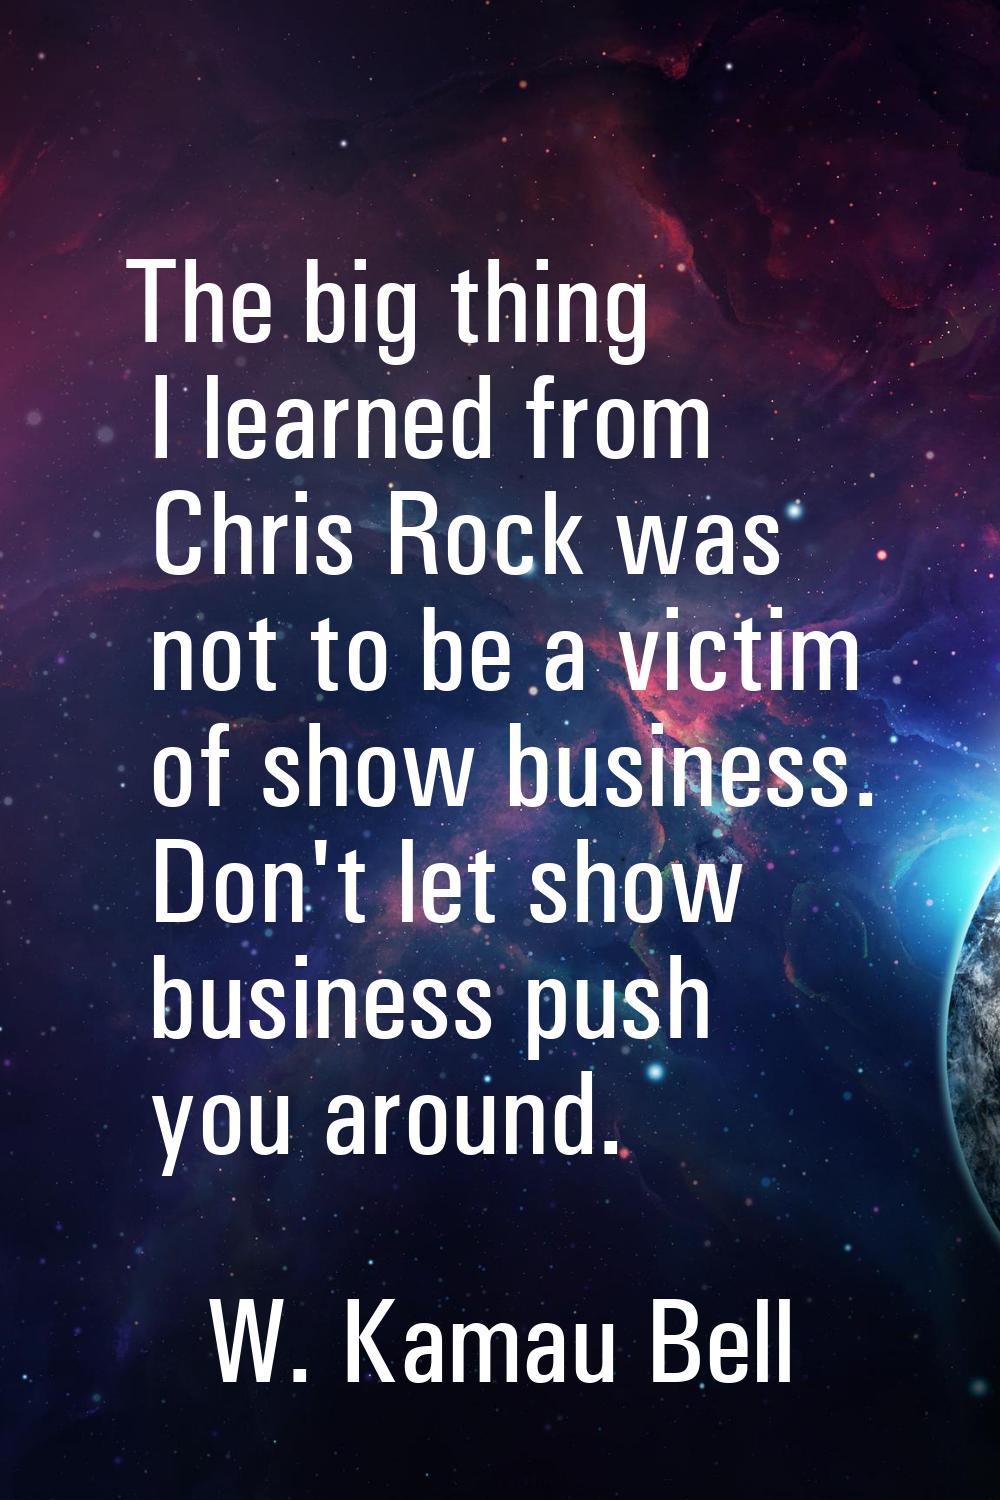 The big thing I learned from Chris Rock was not to be a victim of show business. Don't let show bus